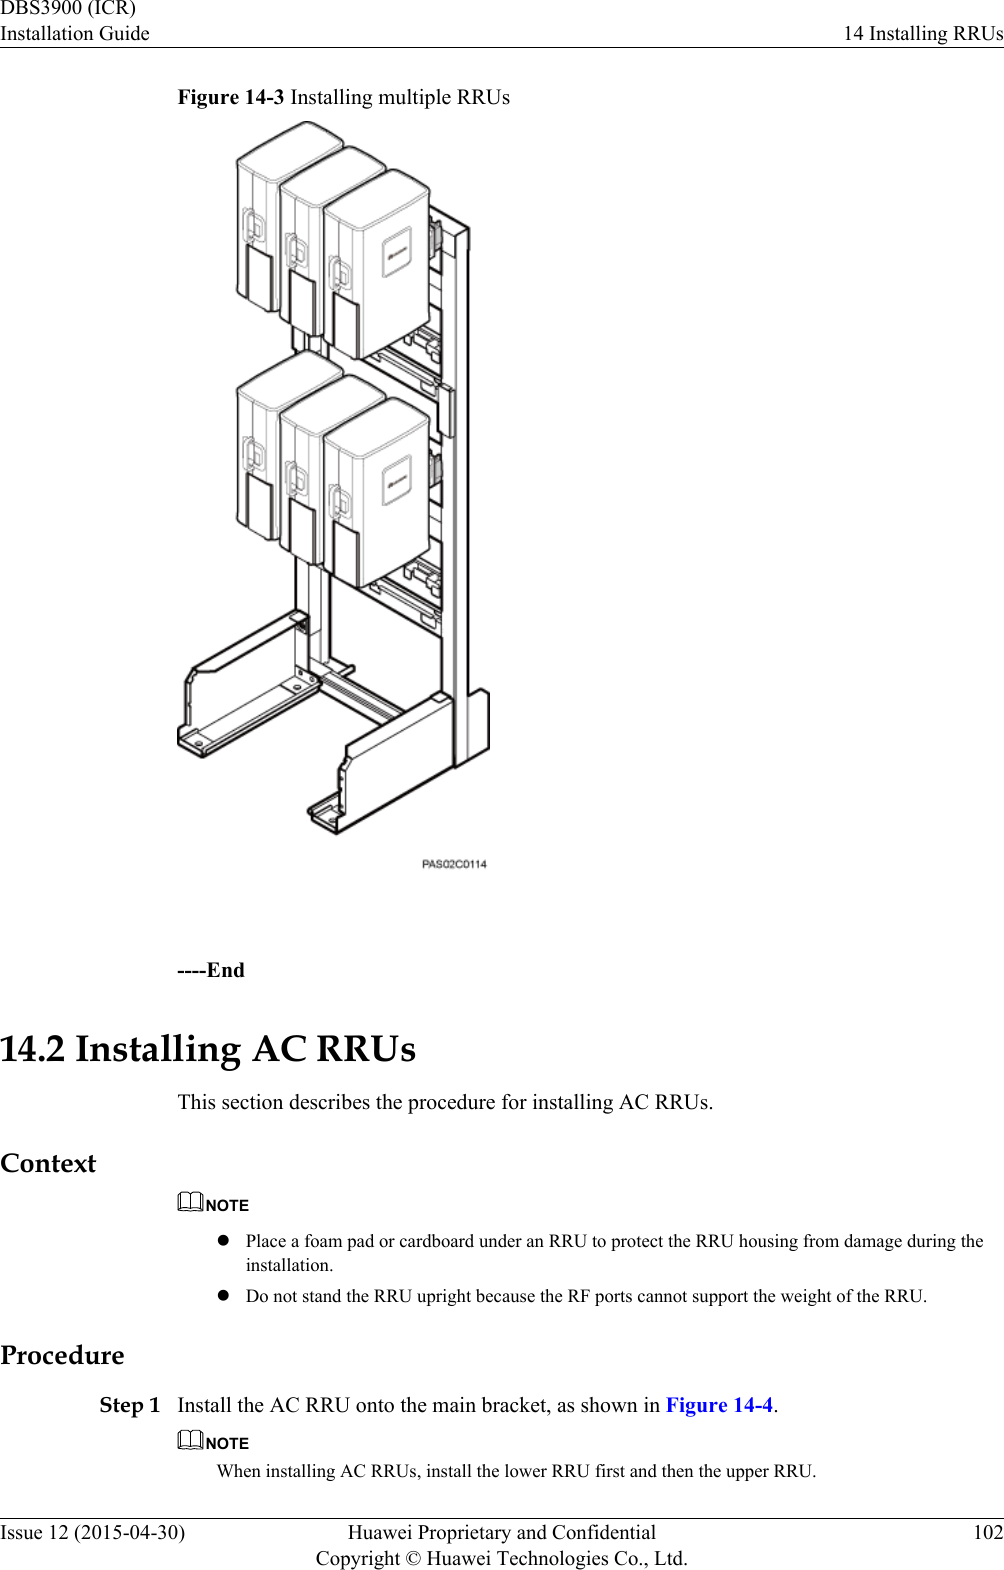 Figure 14-3 Installing multiple RRUs ----End14.2 Installing AC RRUsThis section describes the procedure for installing AC RRUs.ContextNOTElPlace a foam pad or cardboard under an RRU to protect the RRU housing from damage during theinstallation.lDo not stand the RRU upright because the RF ports cannot support the weight of the RRU.ProcedureStep 1 Install the AC RRU onto the main bracket, as shown in Figure 14-4.NOTEWhen installing AC RRUs, install the lower RRU first and then the upper RRU.DBS3900 (ICR)Installation Guide 14 Installing RRUsIssue 12 (2015-04-30) Huawei Proprietary and ConfidentialCopyright © Huawei Technologies Co., Ltd.102